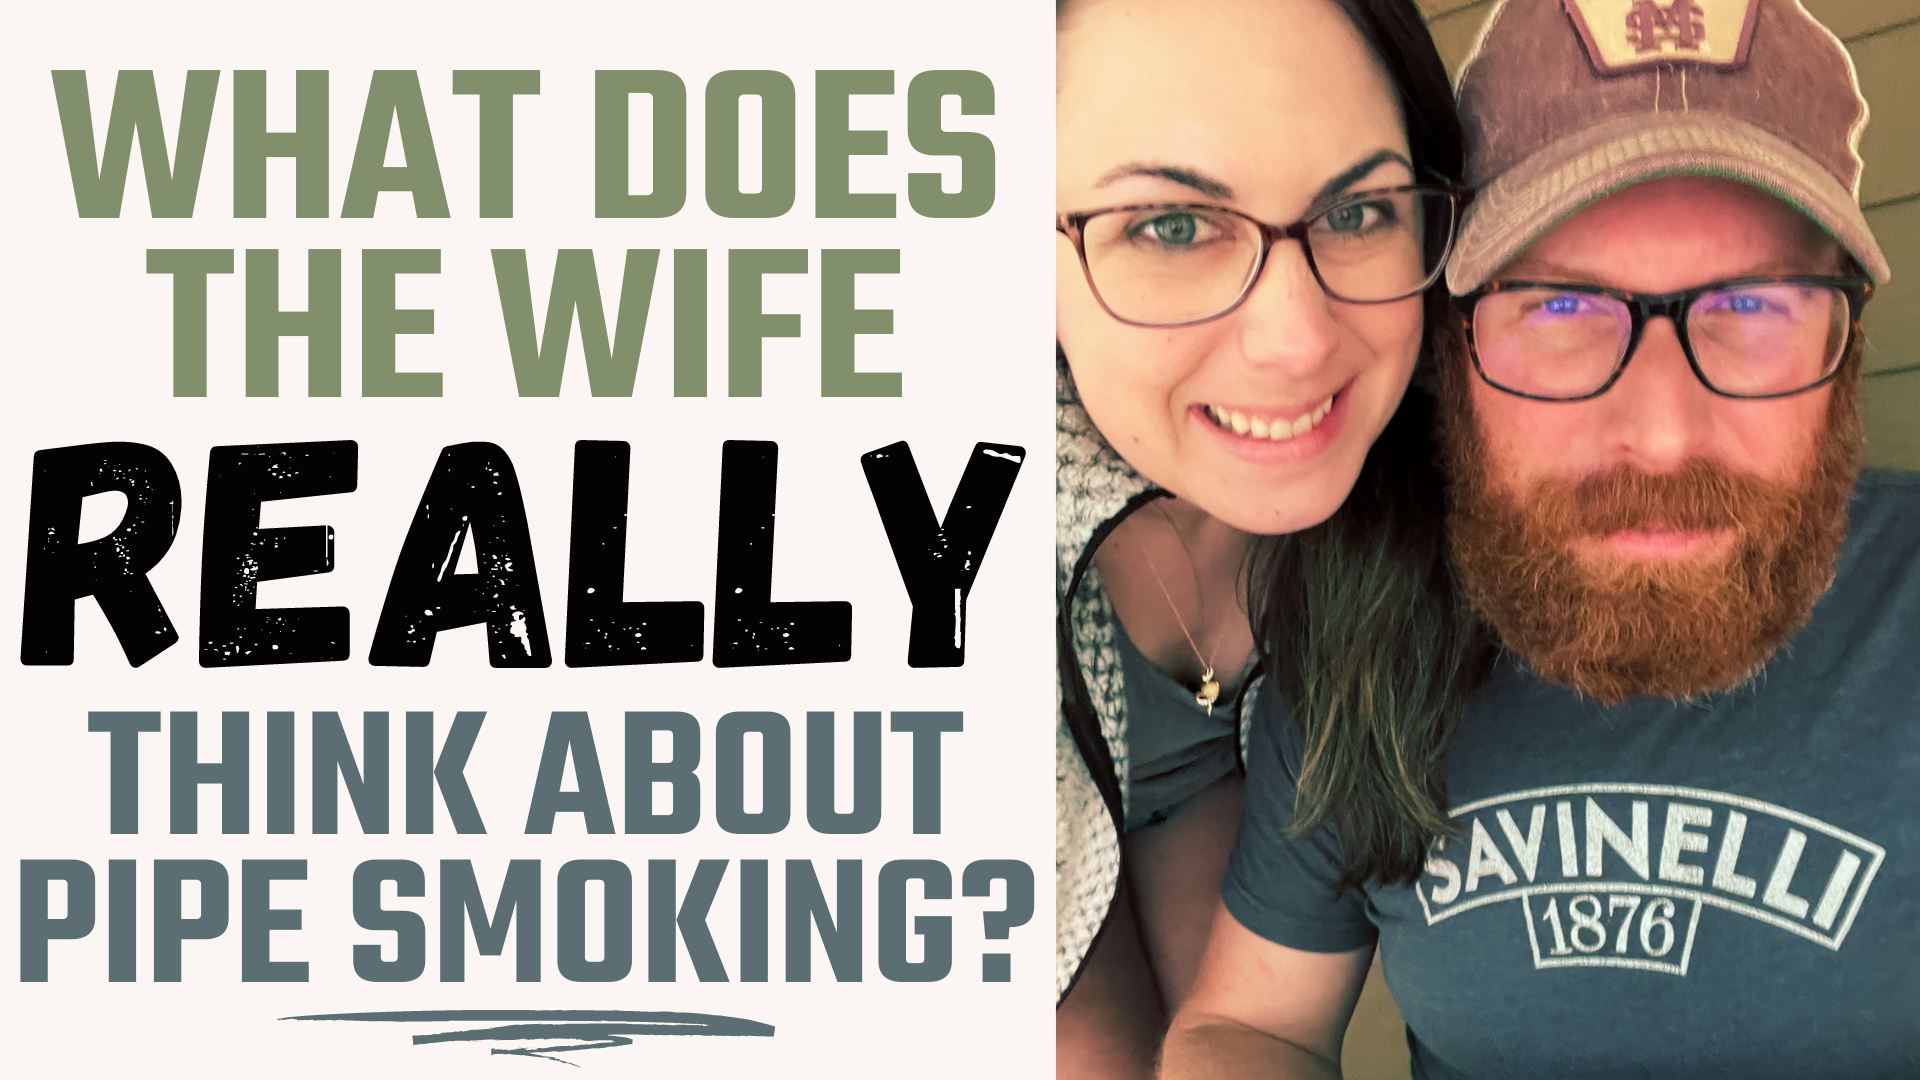 What Does The Wife REALLY Think About Pipe Smoking?